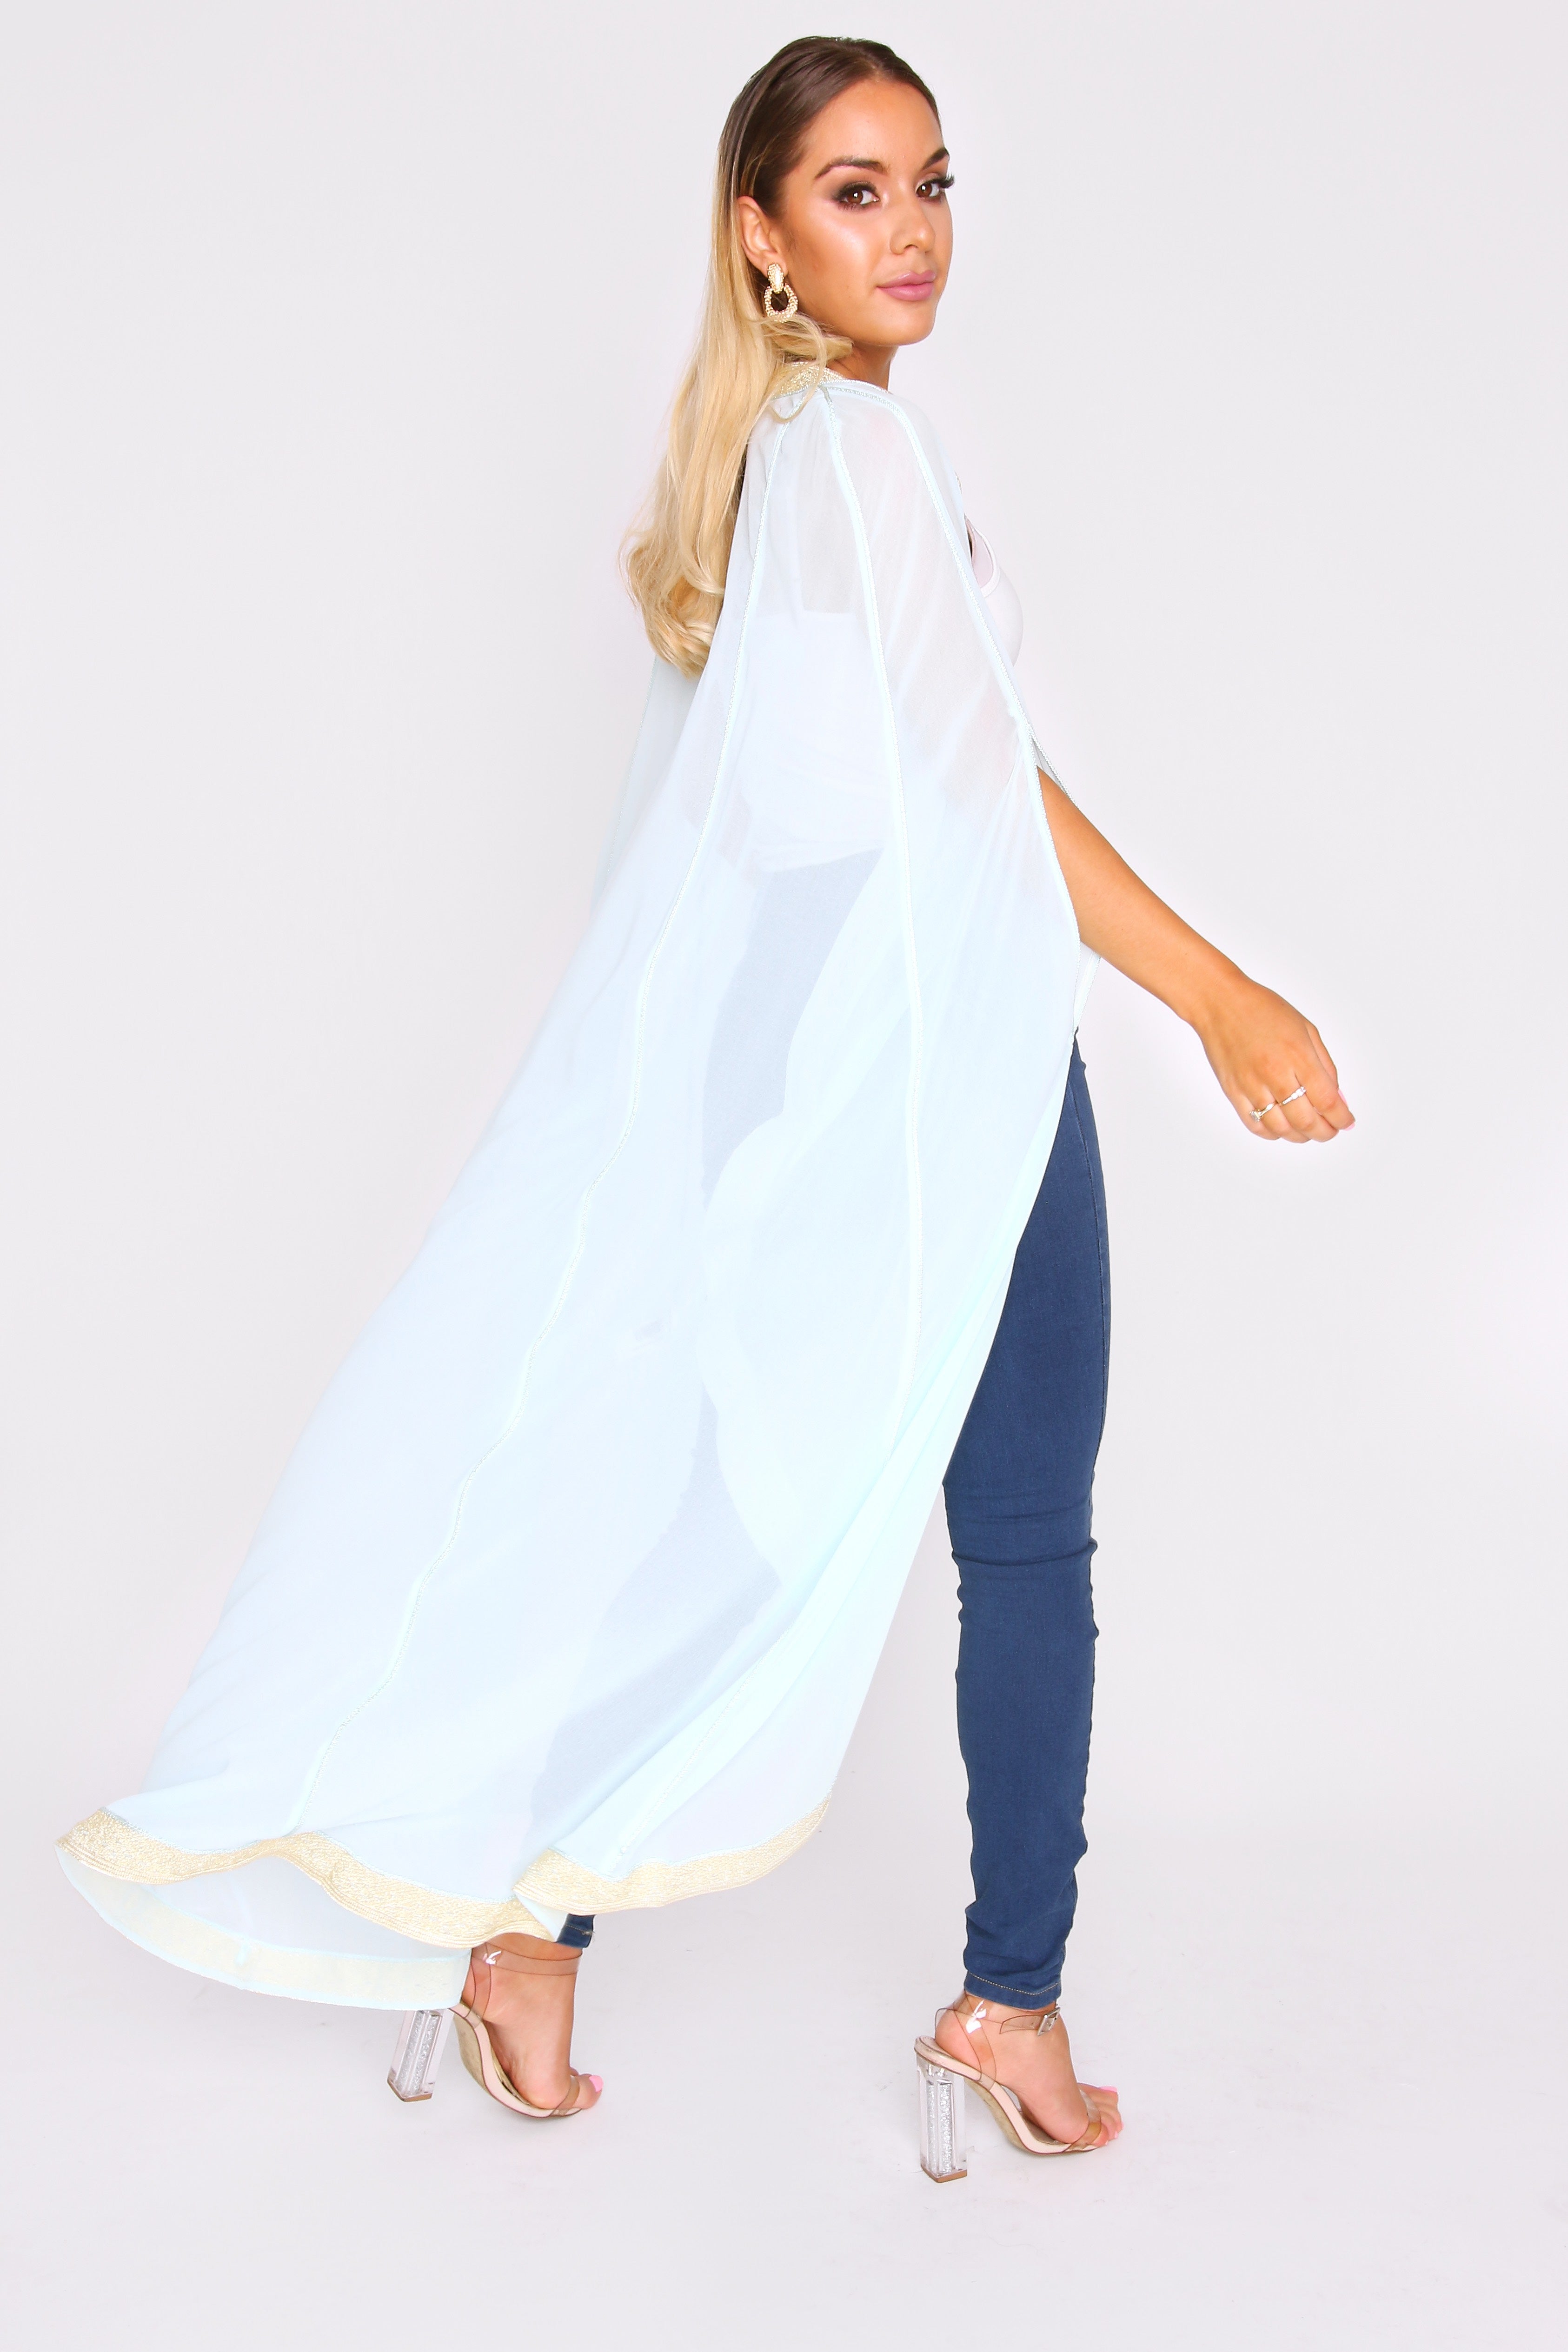 Amalthe Contrast Trim Lightweight Chiffon Sheer Cape Duster Jacket in Blue